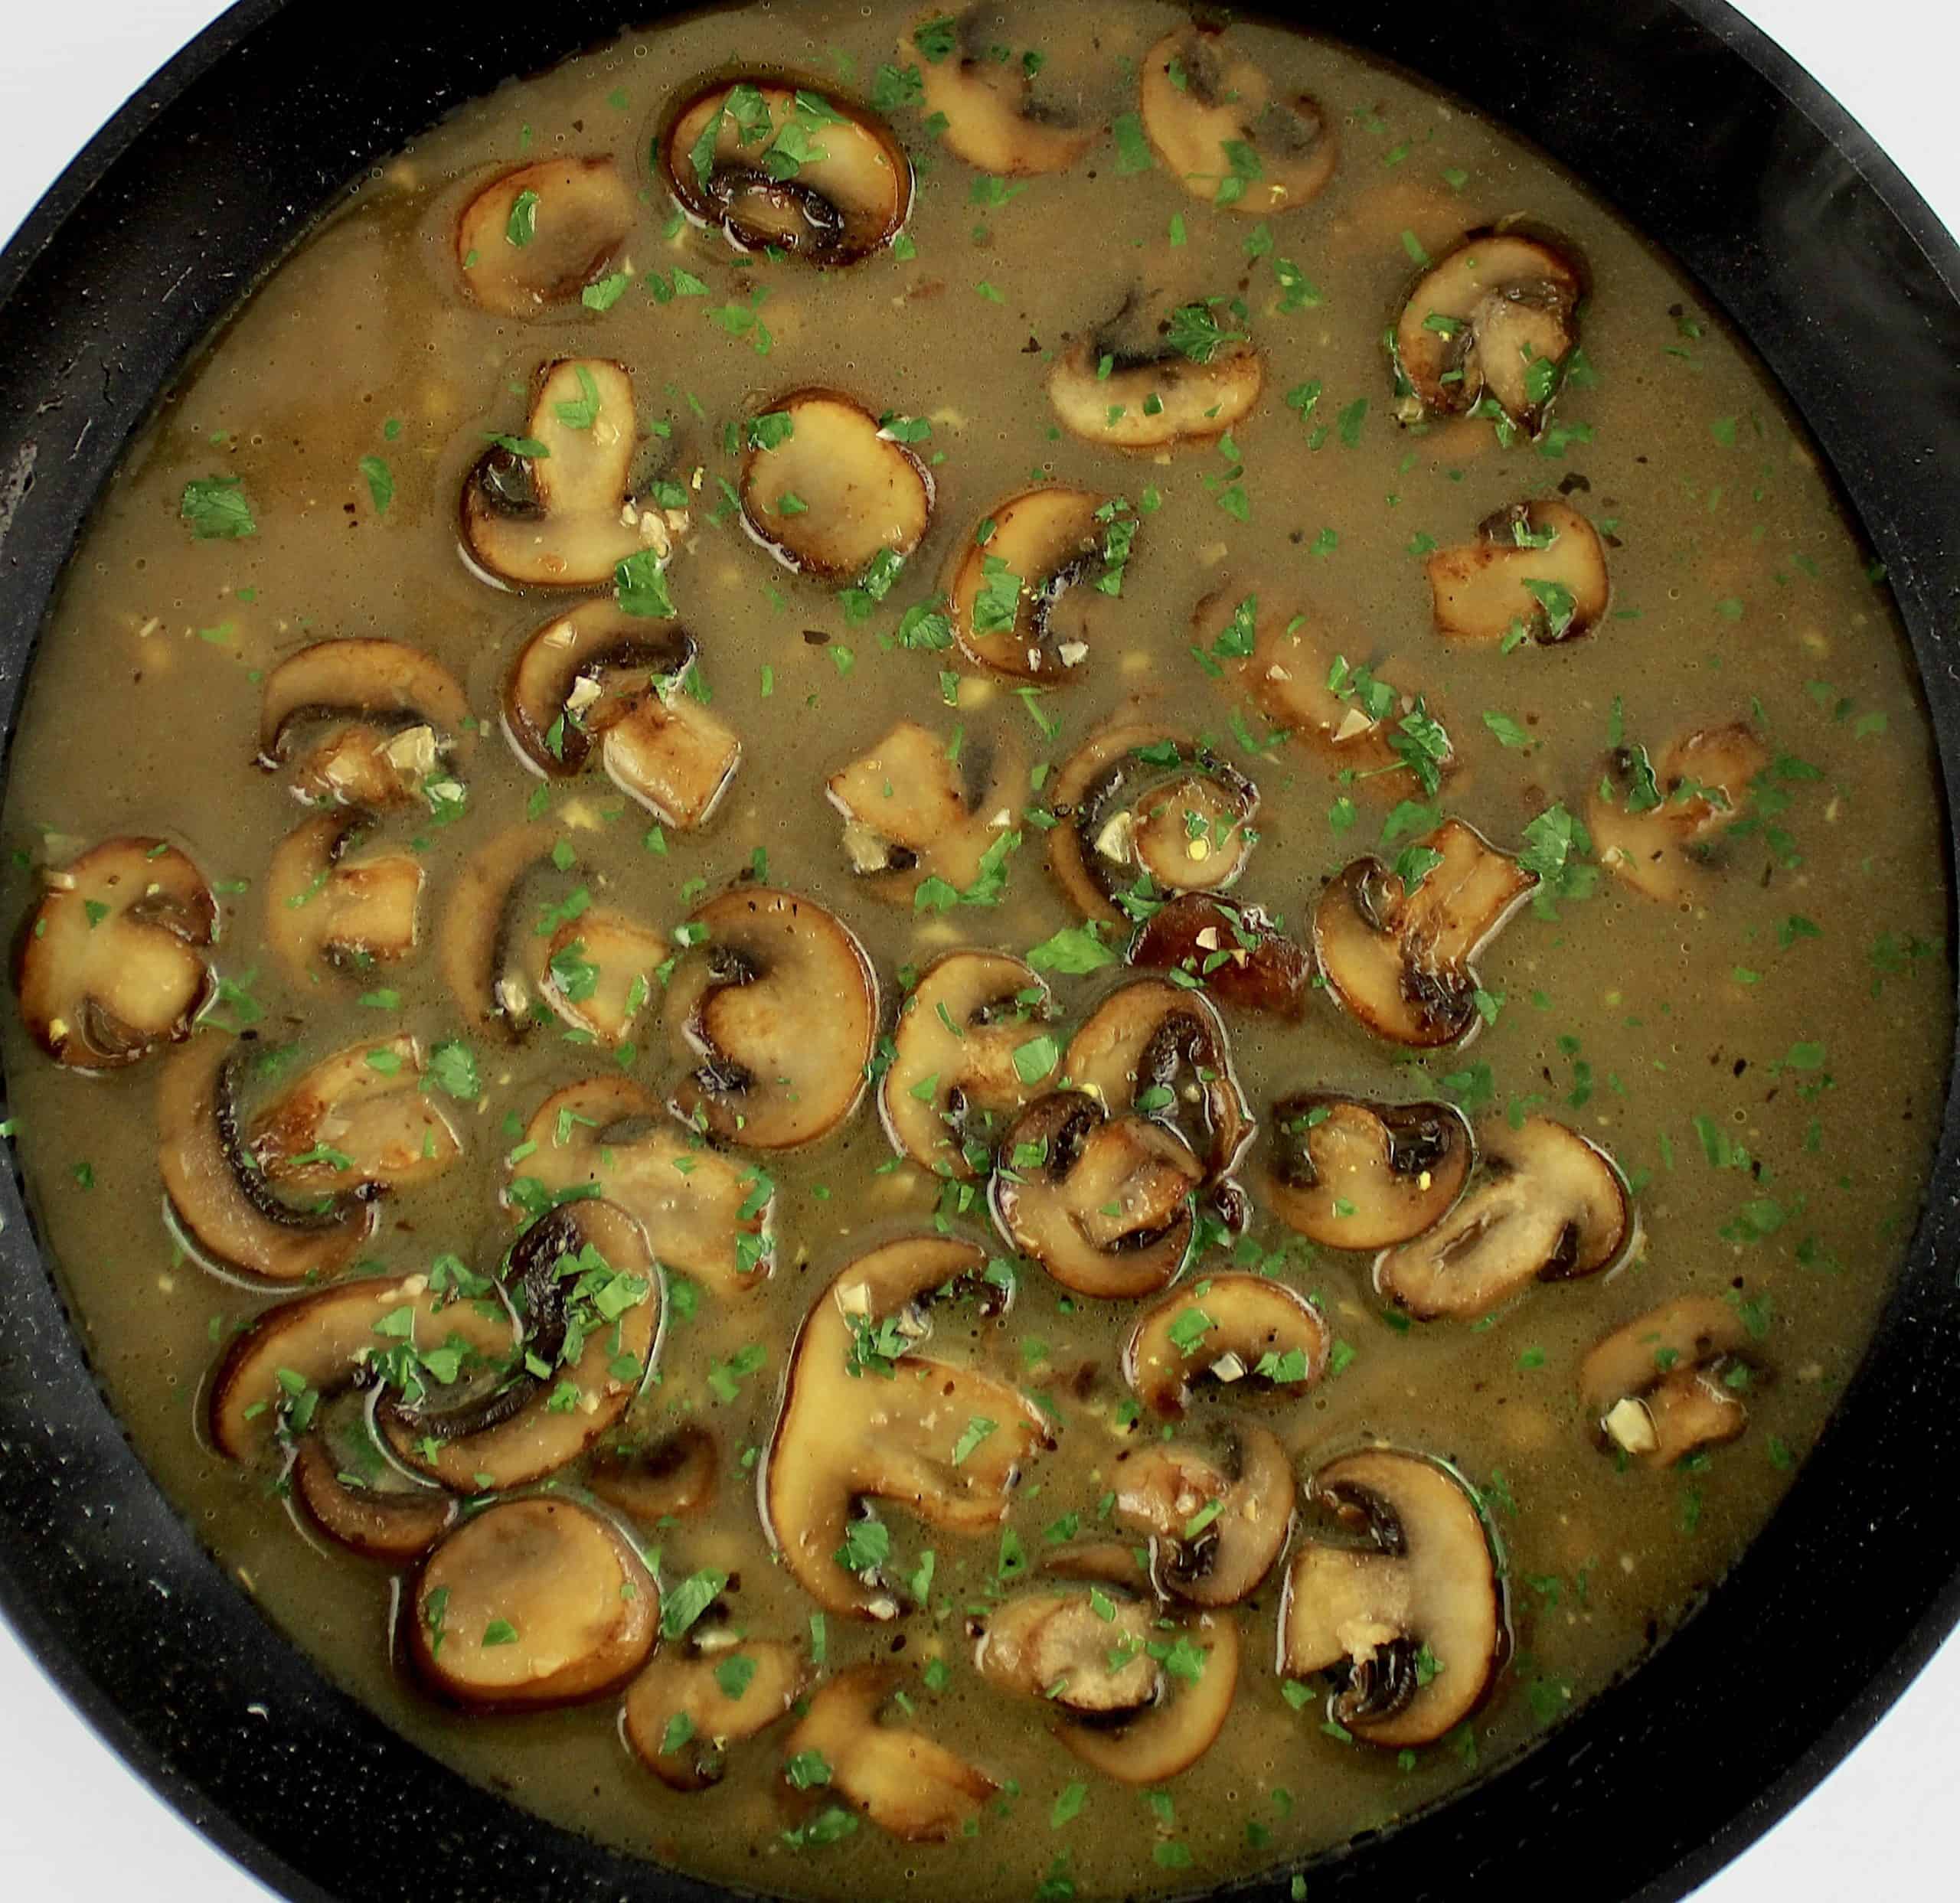 marsala wine sauce in skillet with sliced mushrooms and chopped parsley